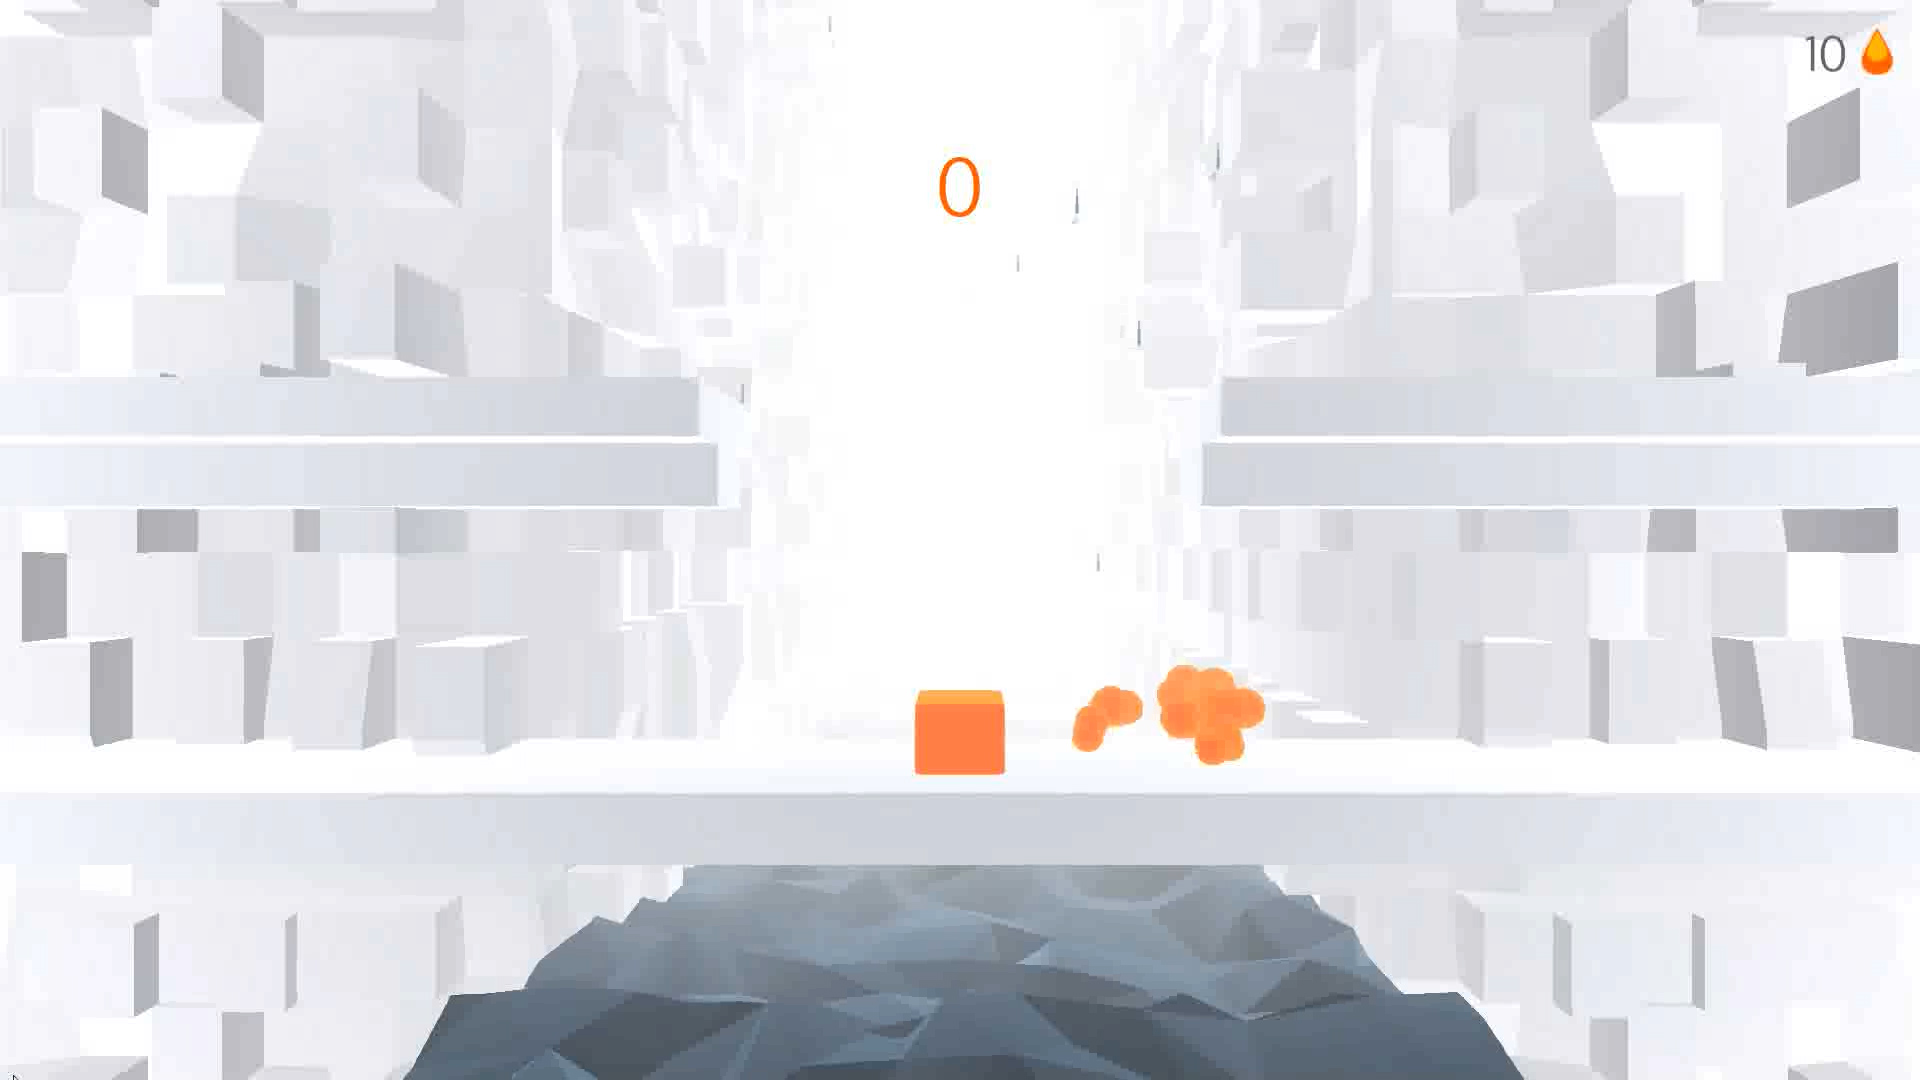 Jelly Jump, Software